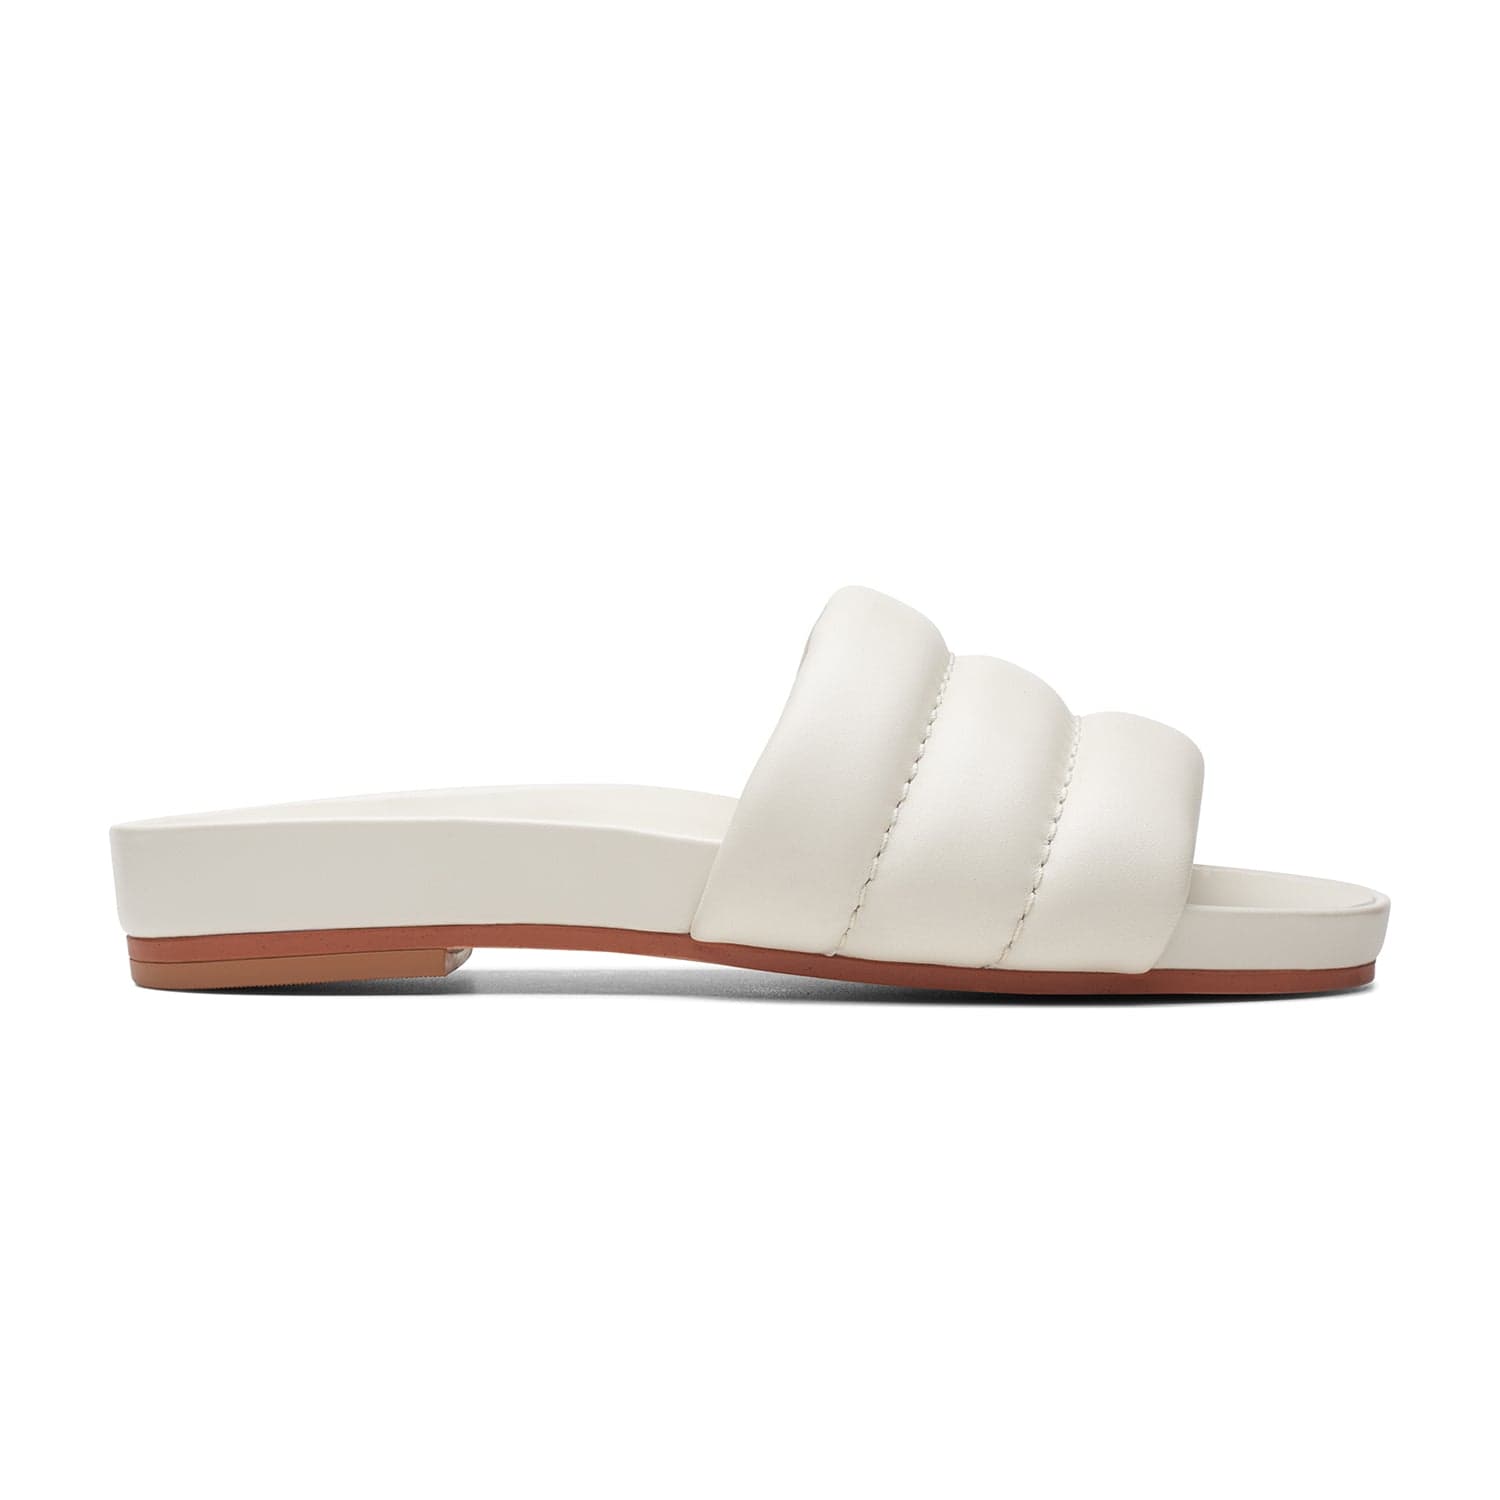 Clarks Pure Soft Sandals - Off White Leather - 261737014 - D Width (Standard Fit)